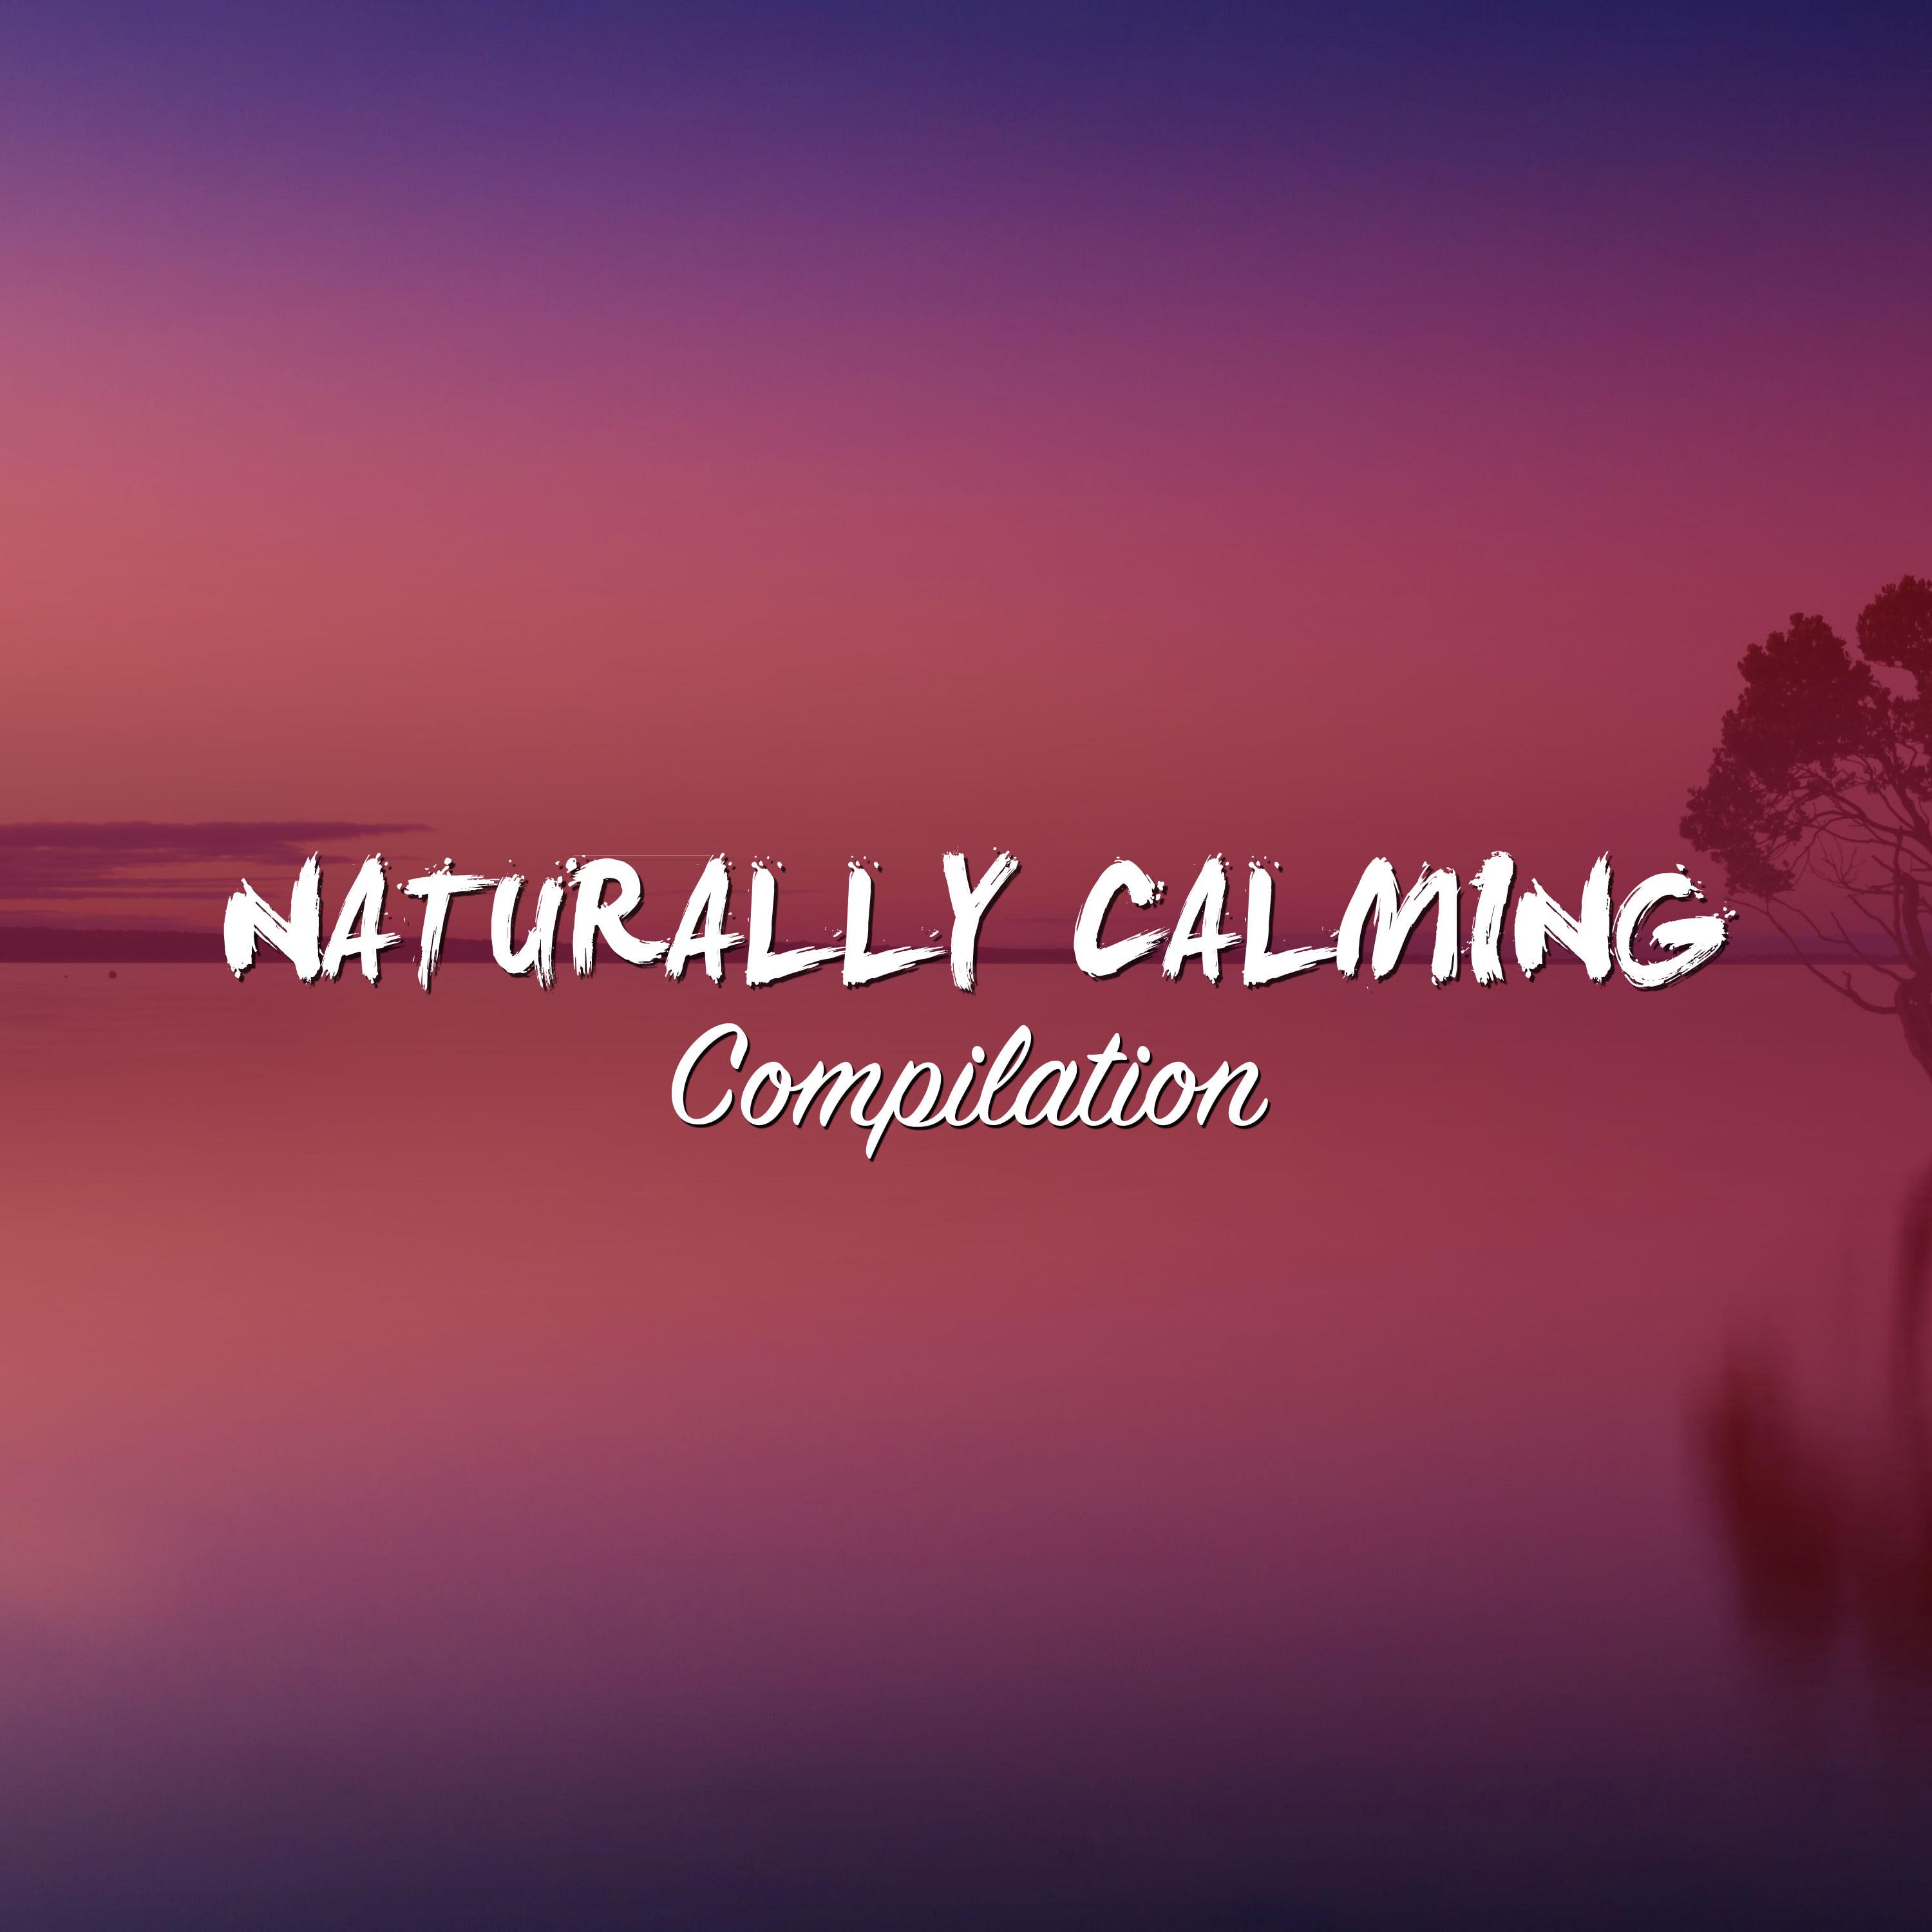 #12 Naturally Calming Compilation for Yoga